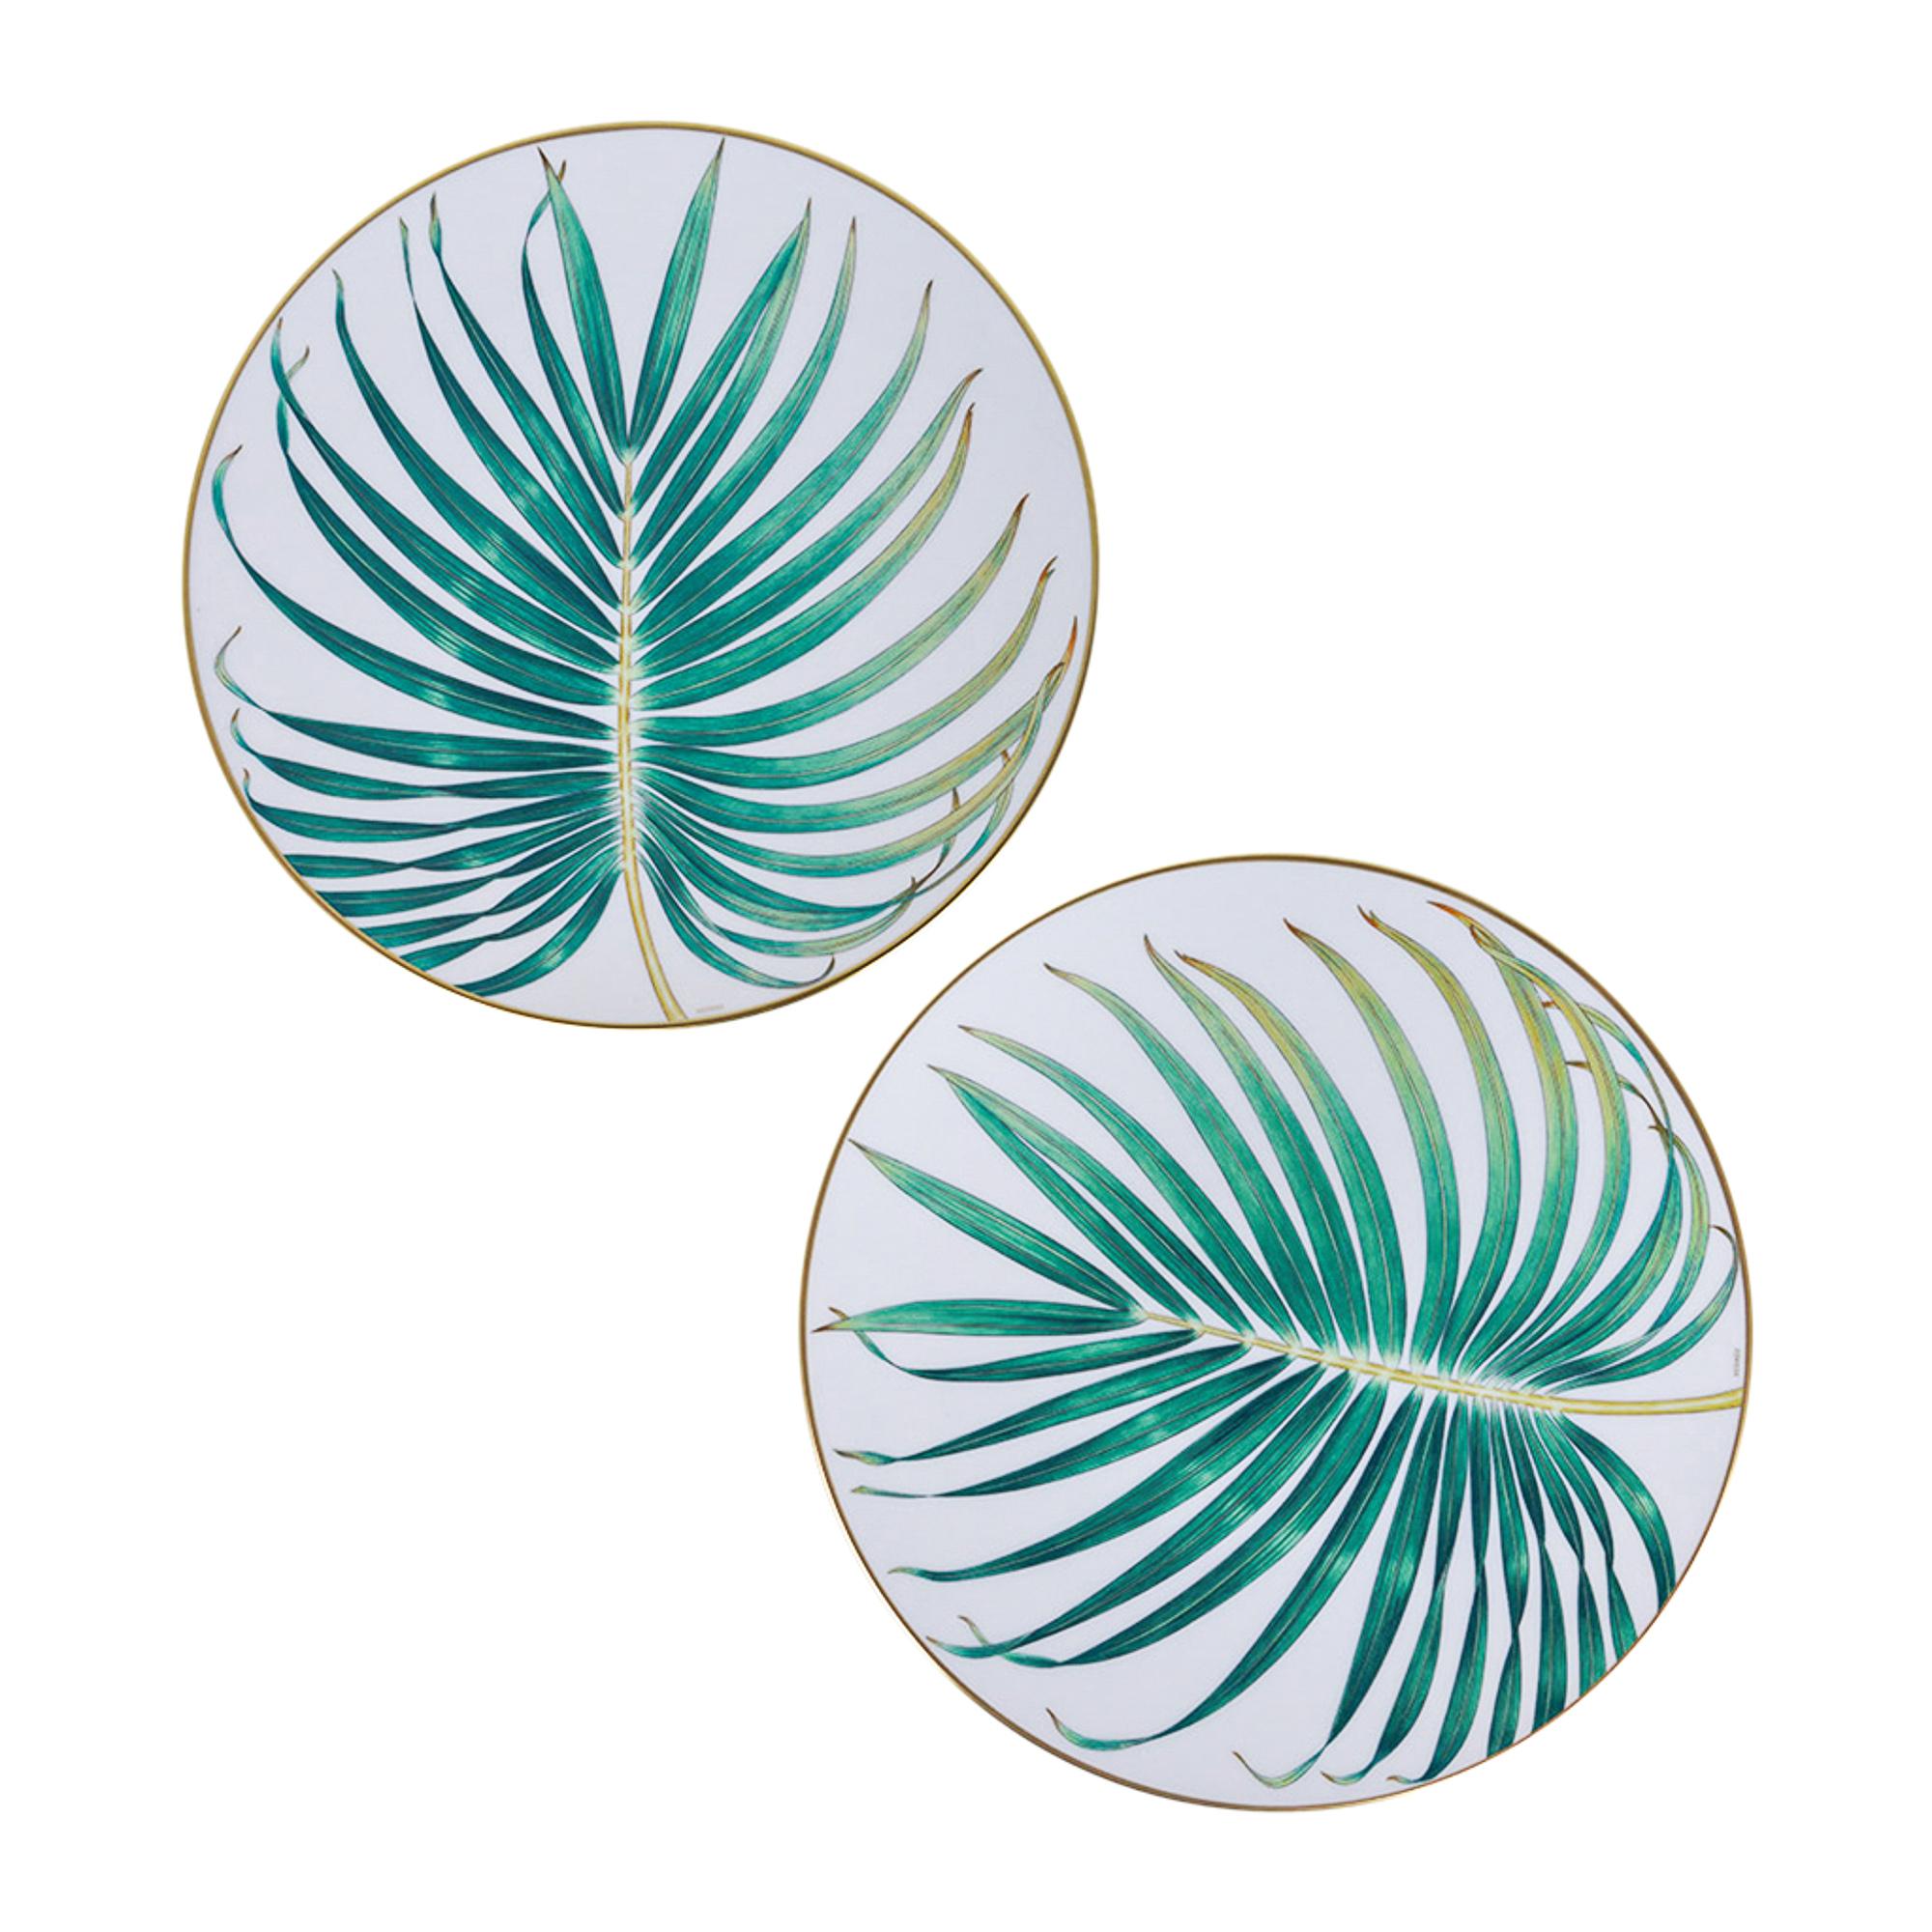 Mightychic offers a set of two (2) Hermes Dinner Plates #2 featured in the classic Hermes Passifolia pattern.
A beautiful hommage to the peace and power of flora.
Decorated using Chromolithography.
Hand-painted 24K gold trim.
Beautiful dinner plate